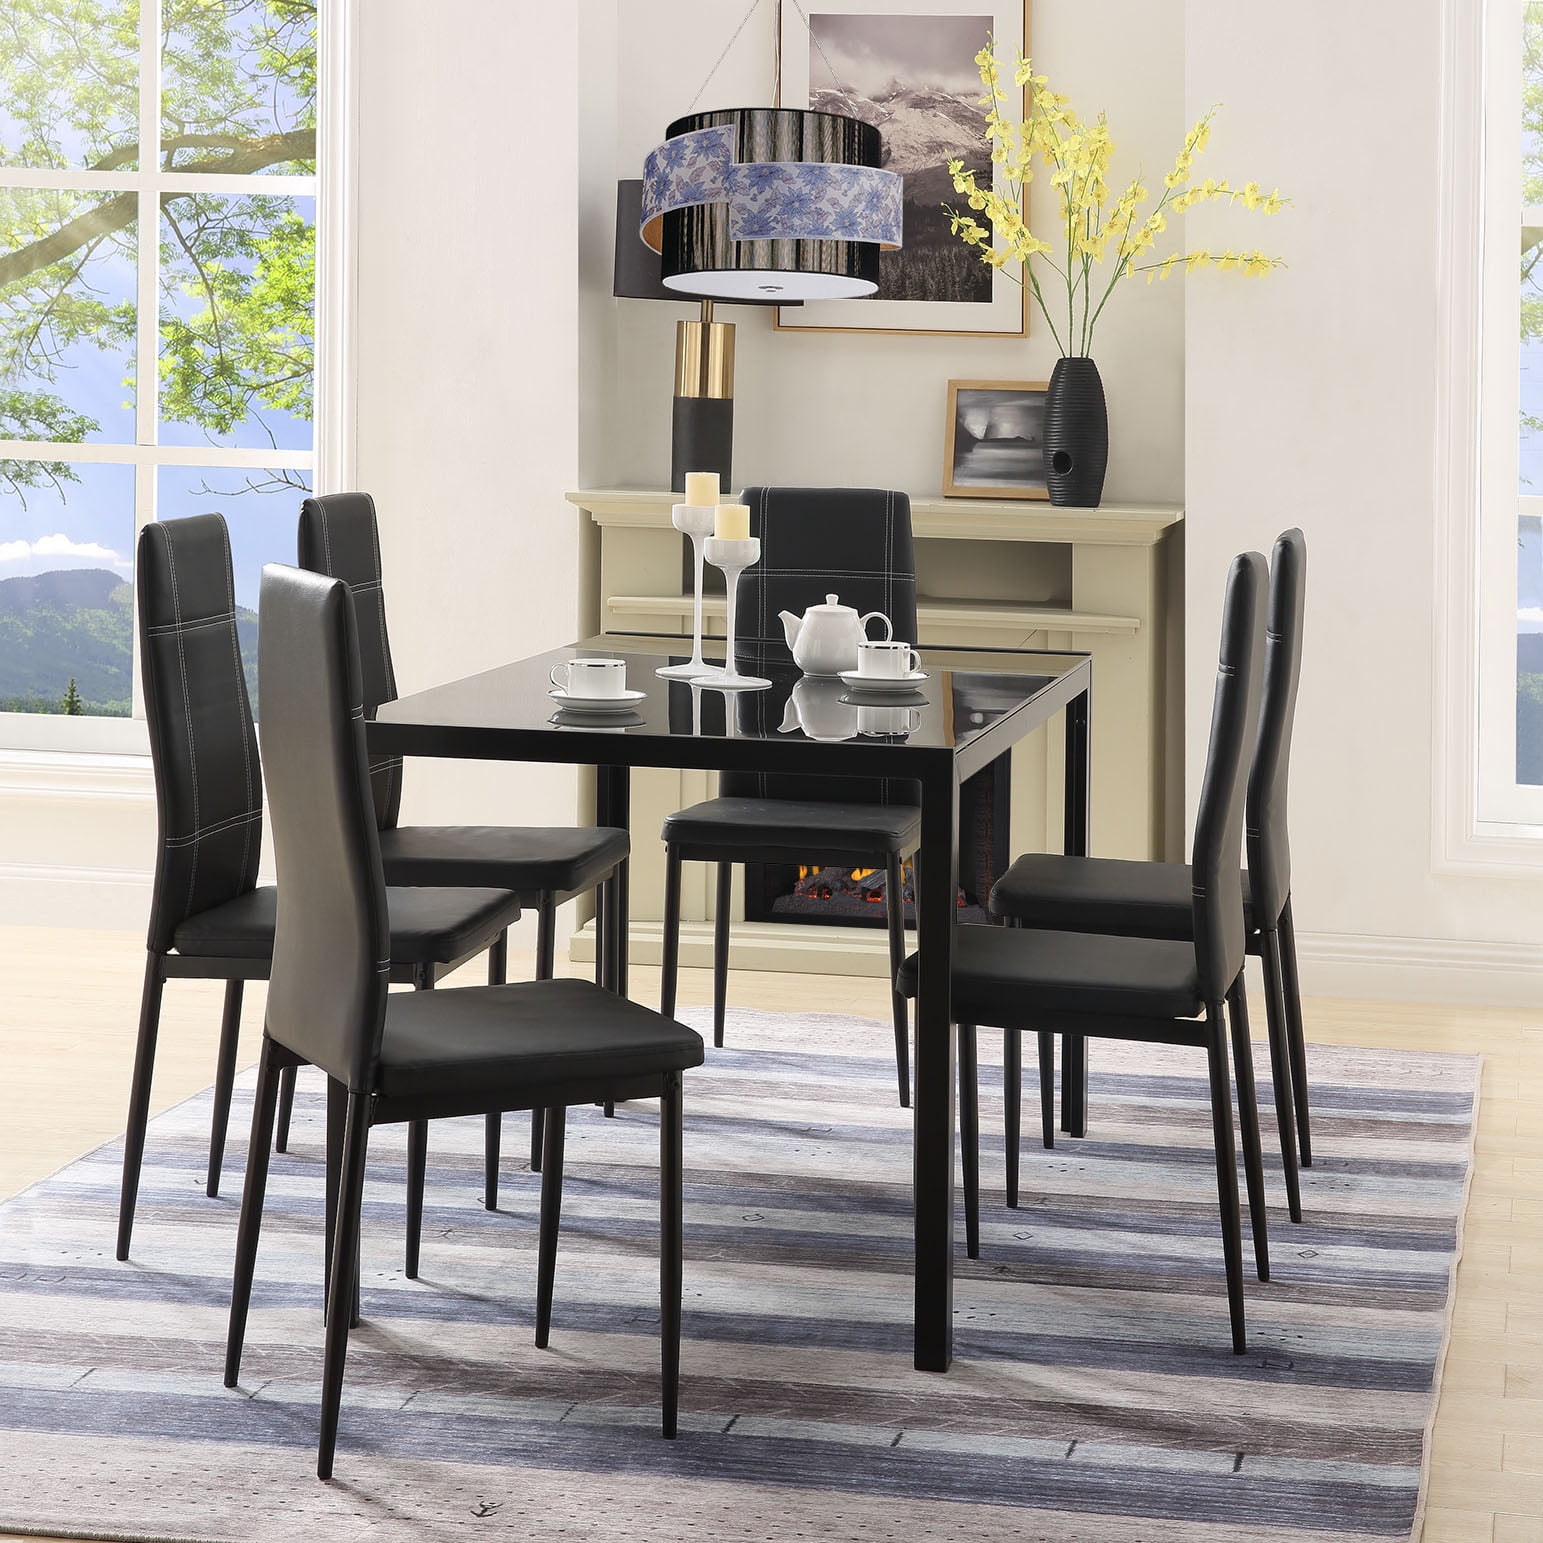 Metal Dining Table Set With 6 Chairs, Small Black Glass Dining Table And Chairs